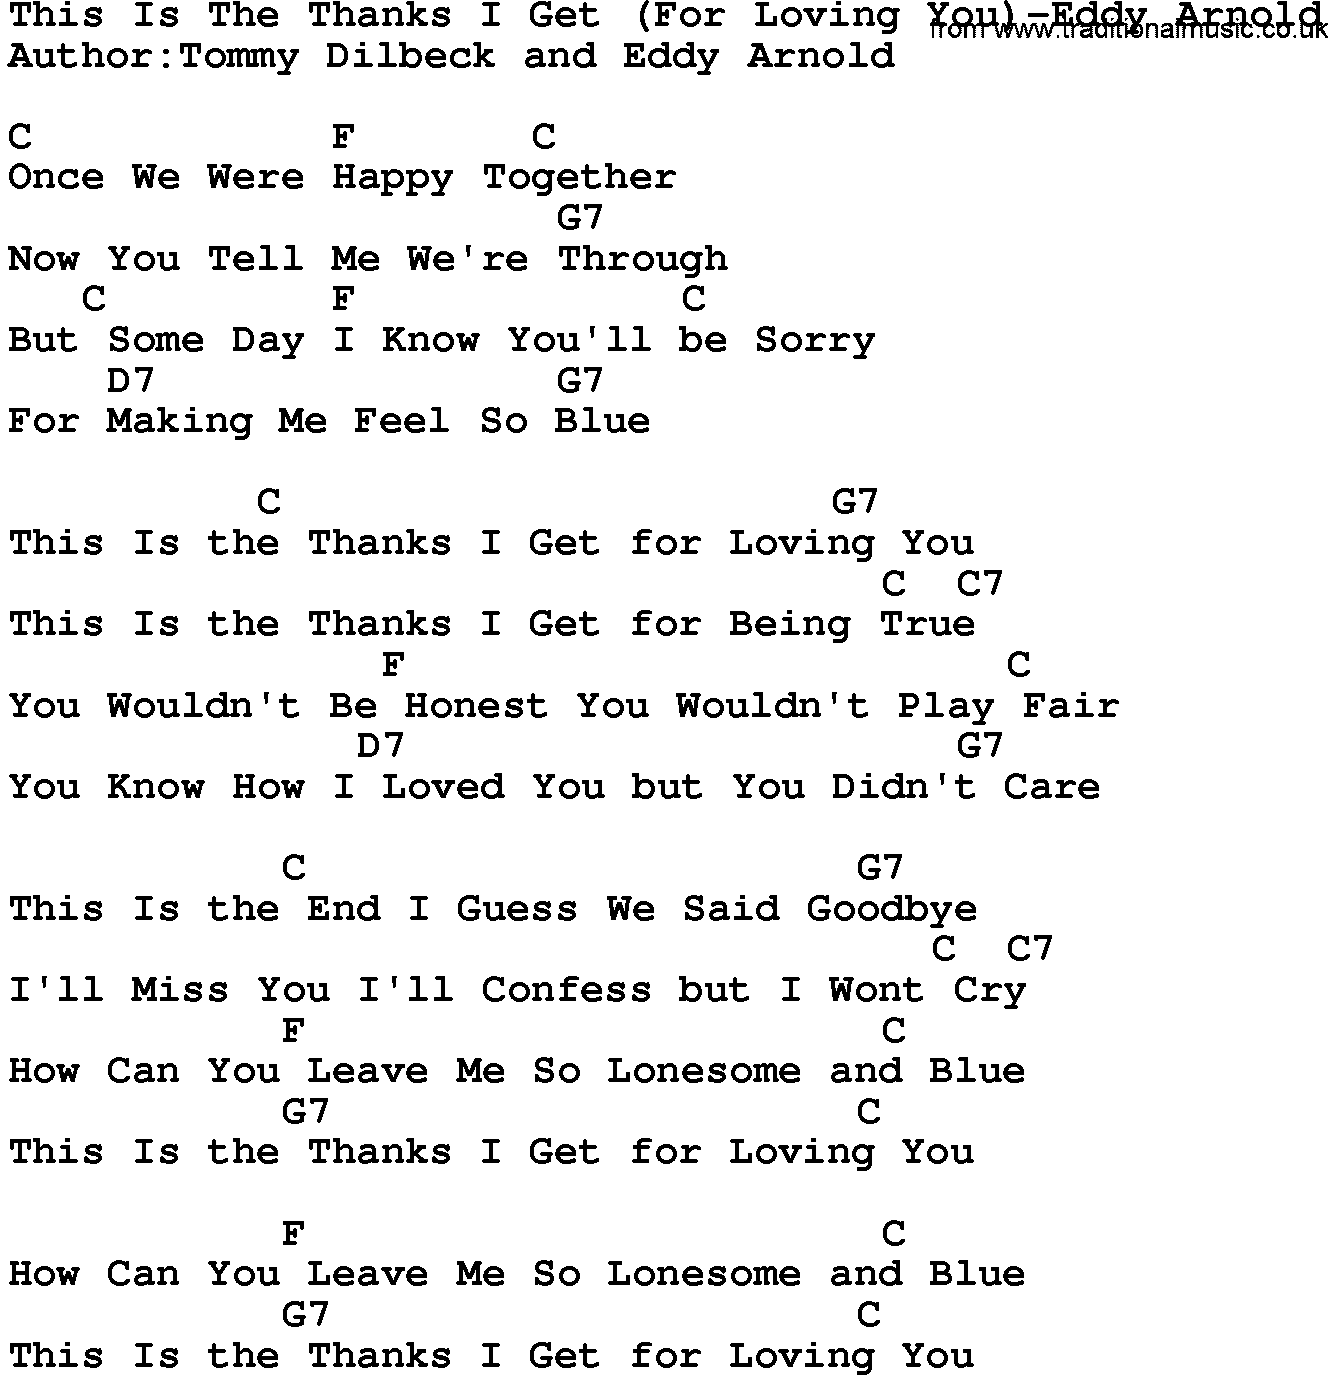 Country music song: This Is The Thanks I Get(For Loving You)-Eddy Arnold lyrics and chords